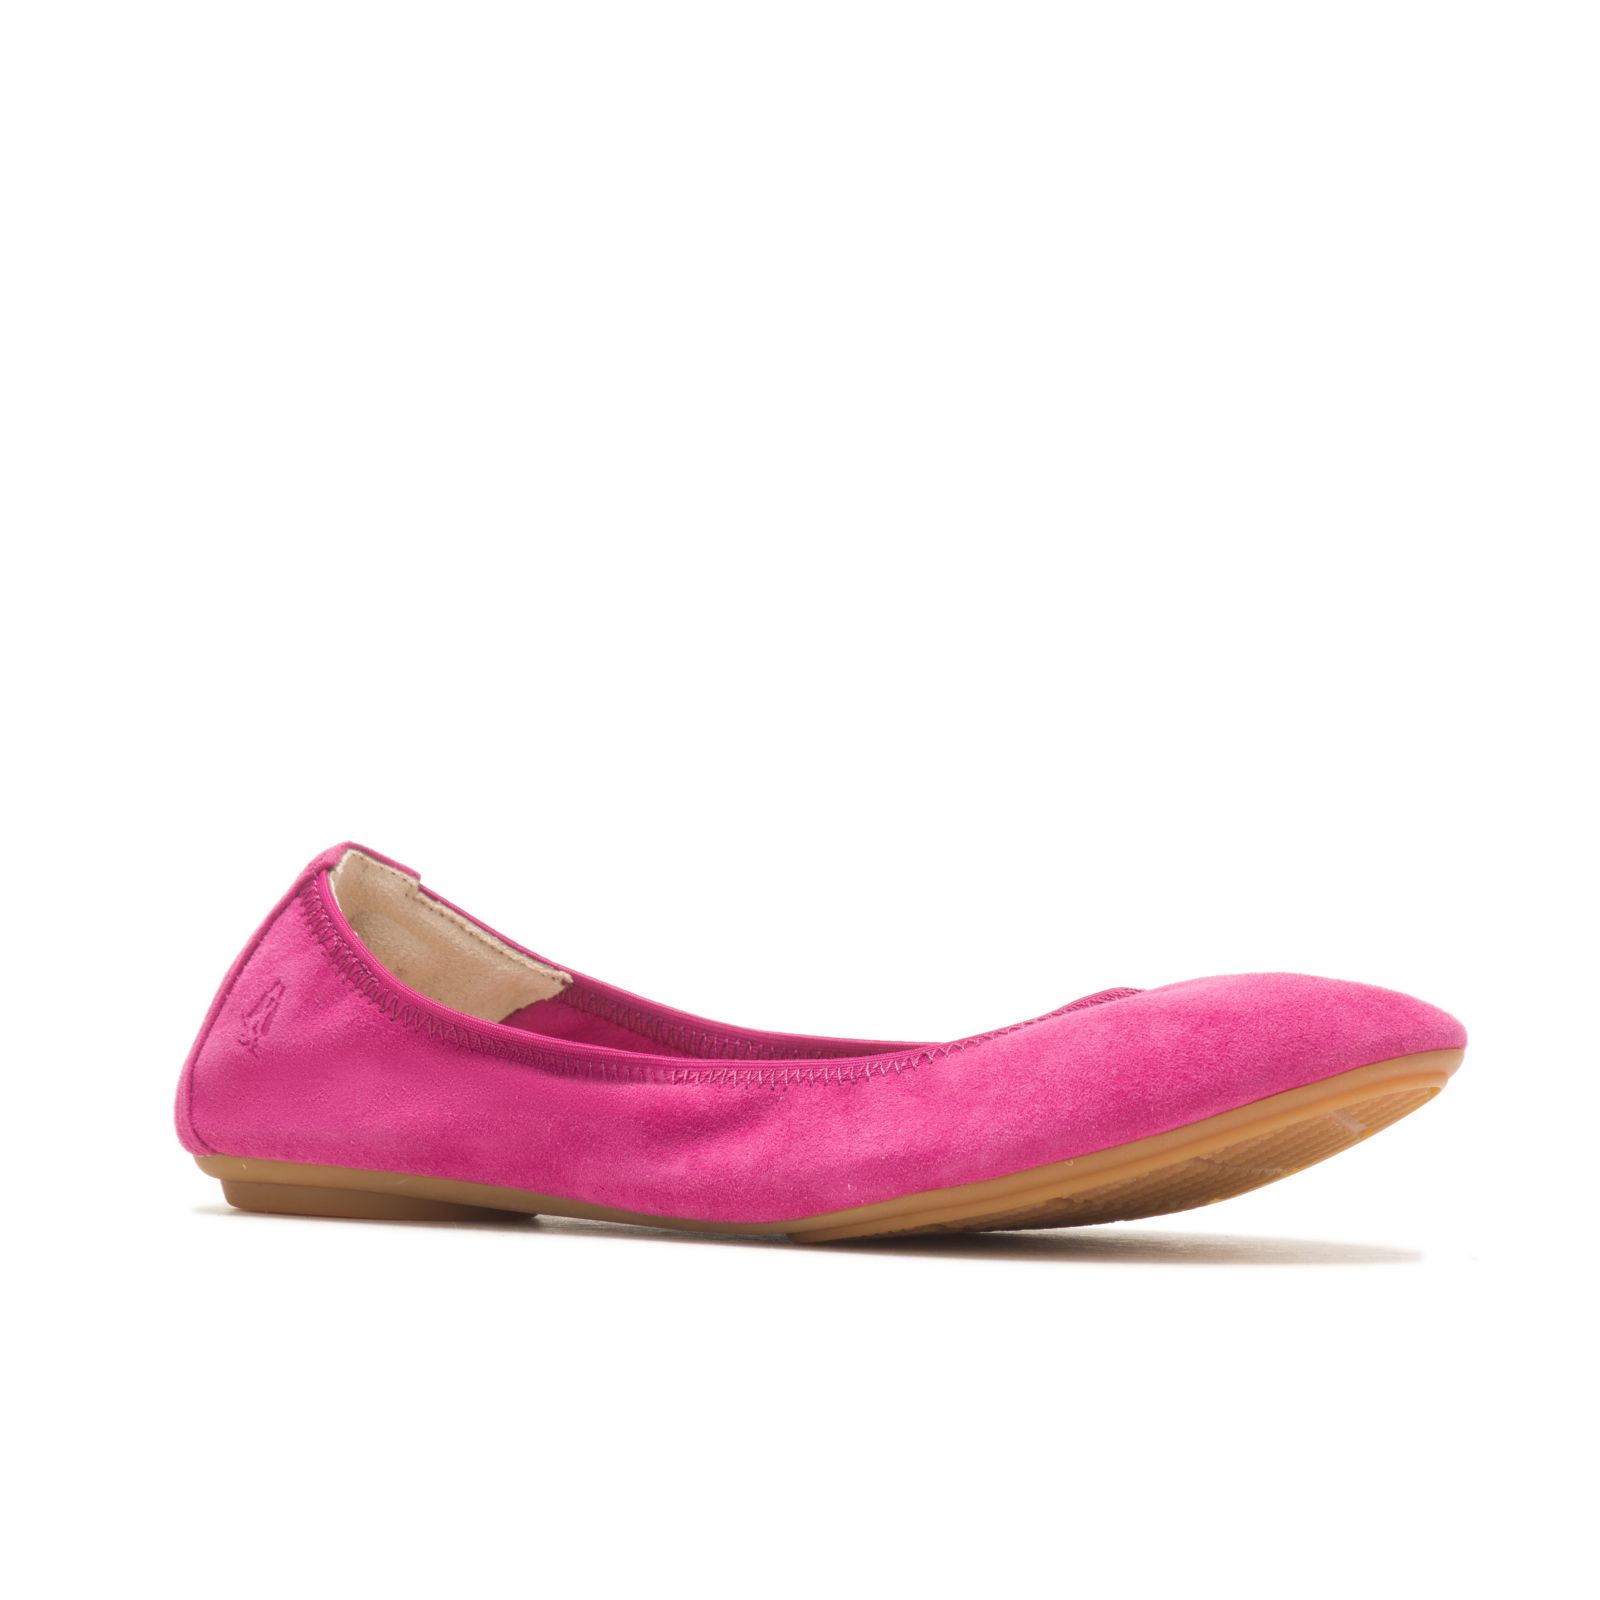 Tenis Planos Hush Puppies Chaste Ballet 2 Mujer Very Berry Suede | QOAVMHJ-95